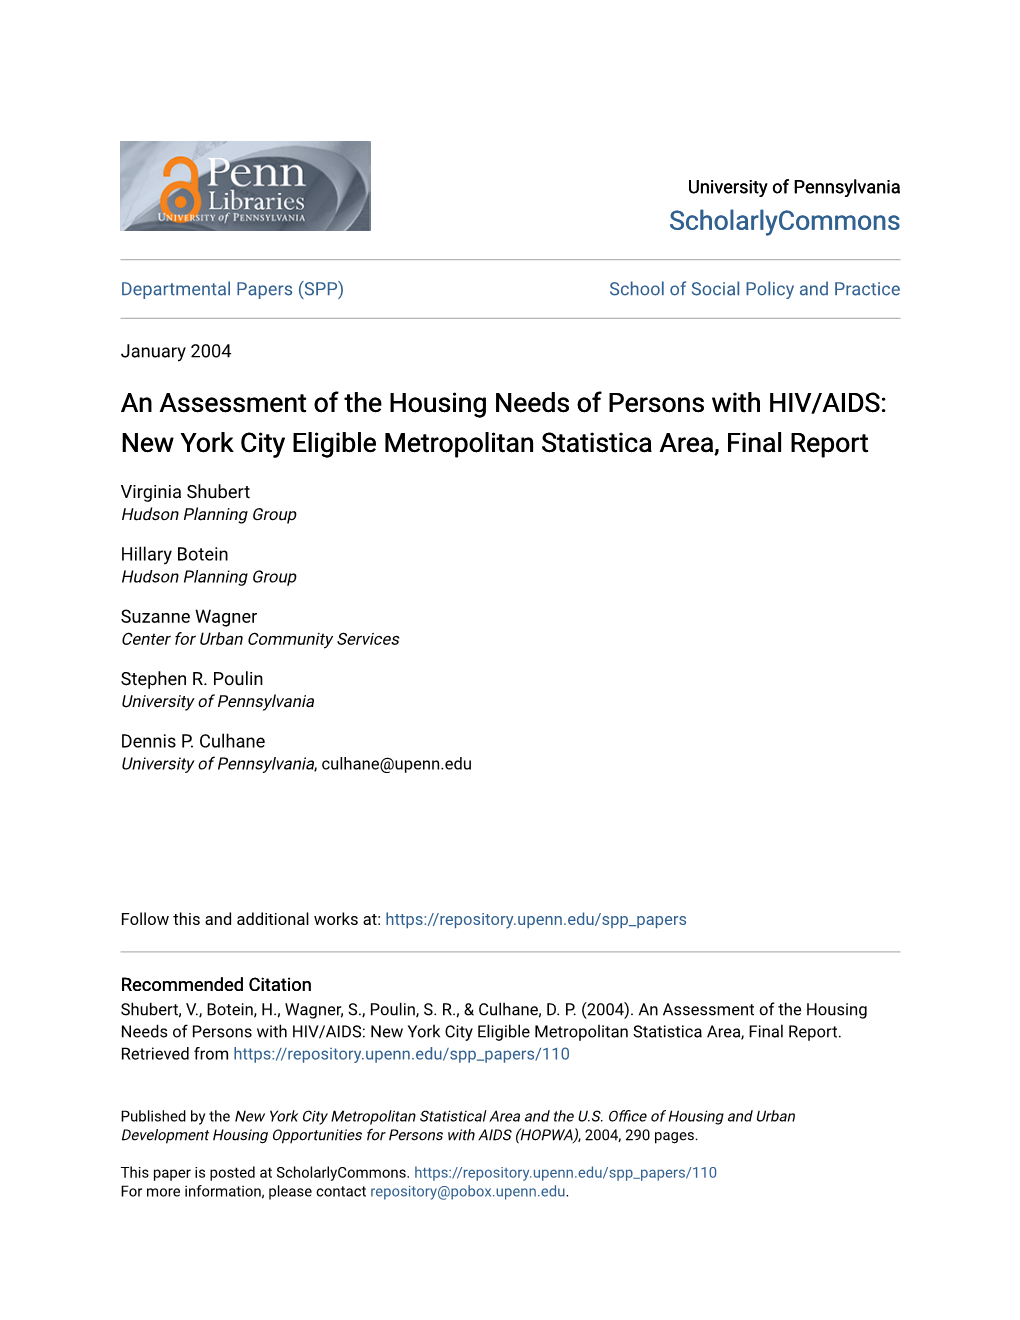 An Assessment of the Housing Needs of Persons with HIV/AIDS: New York City Eligible Metropolitan Statistica Area, Final Report